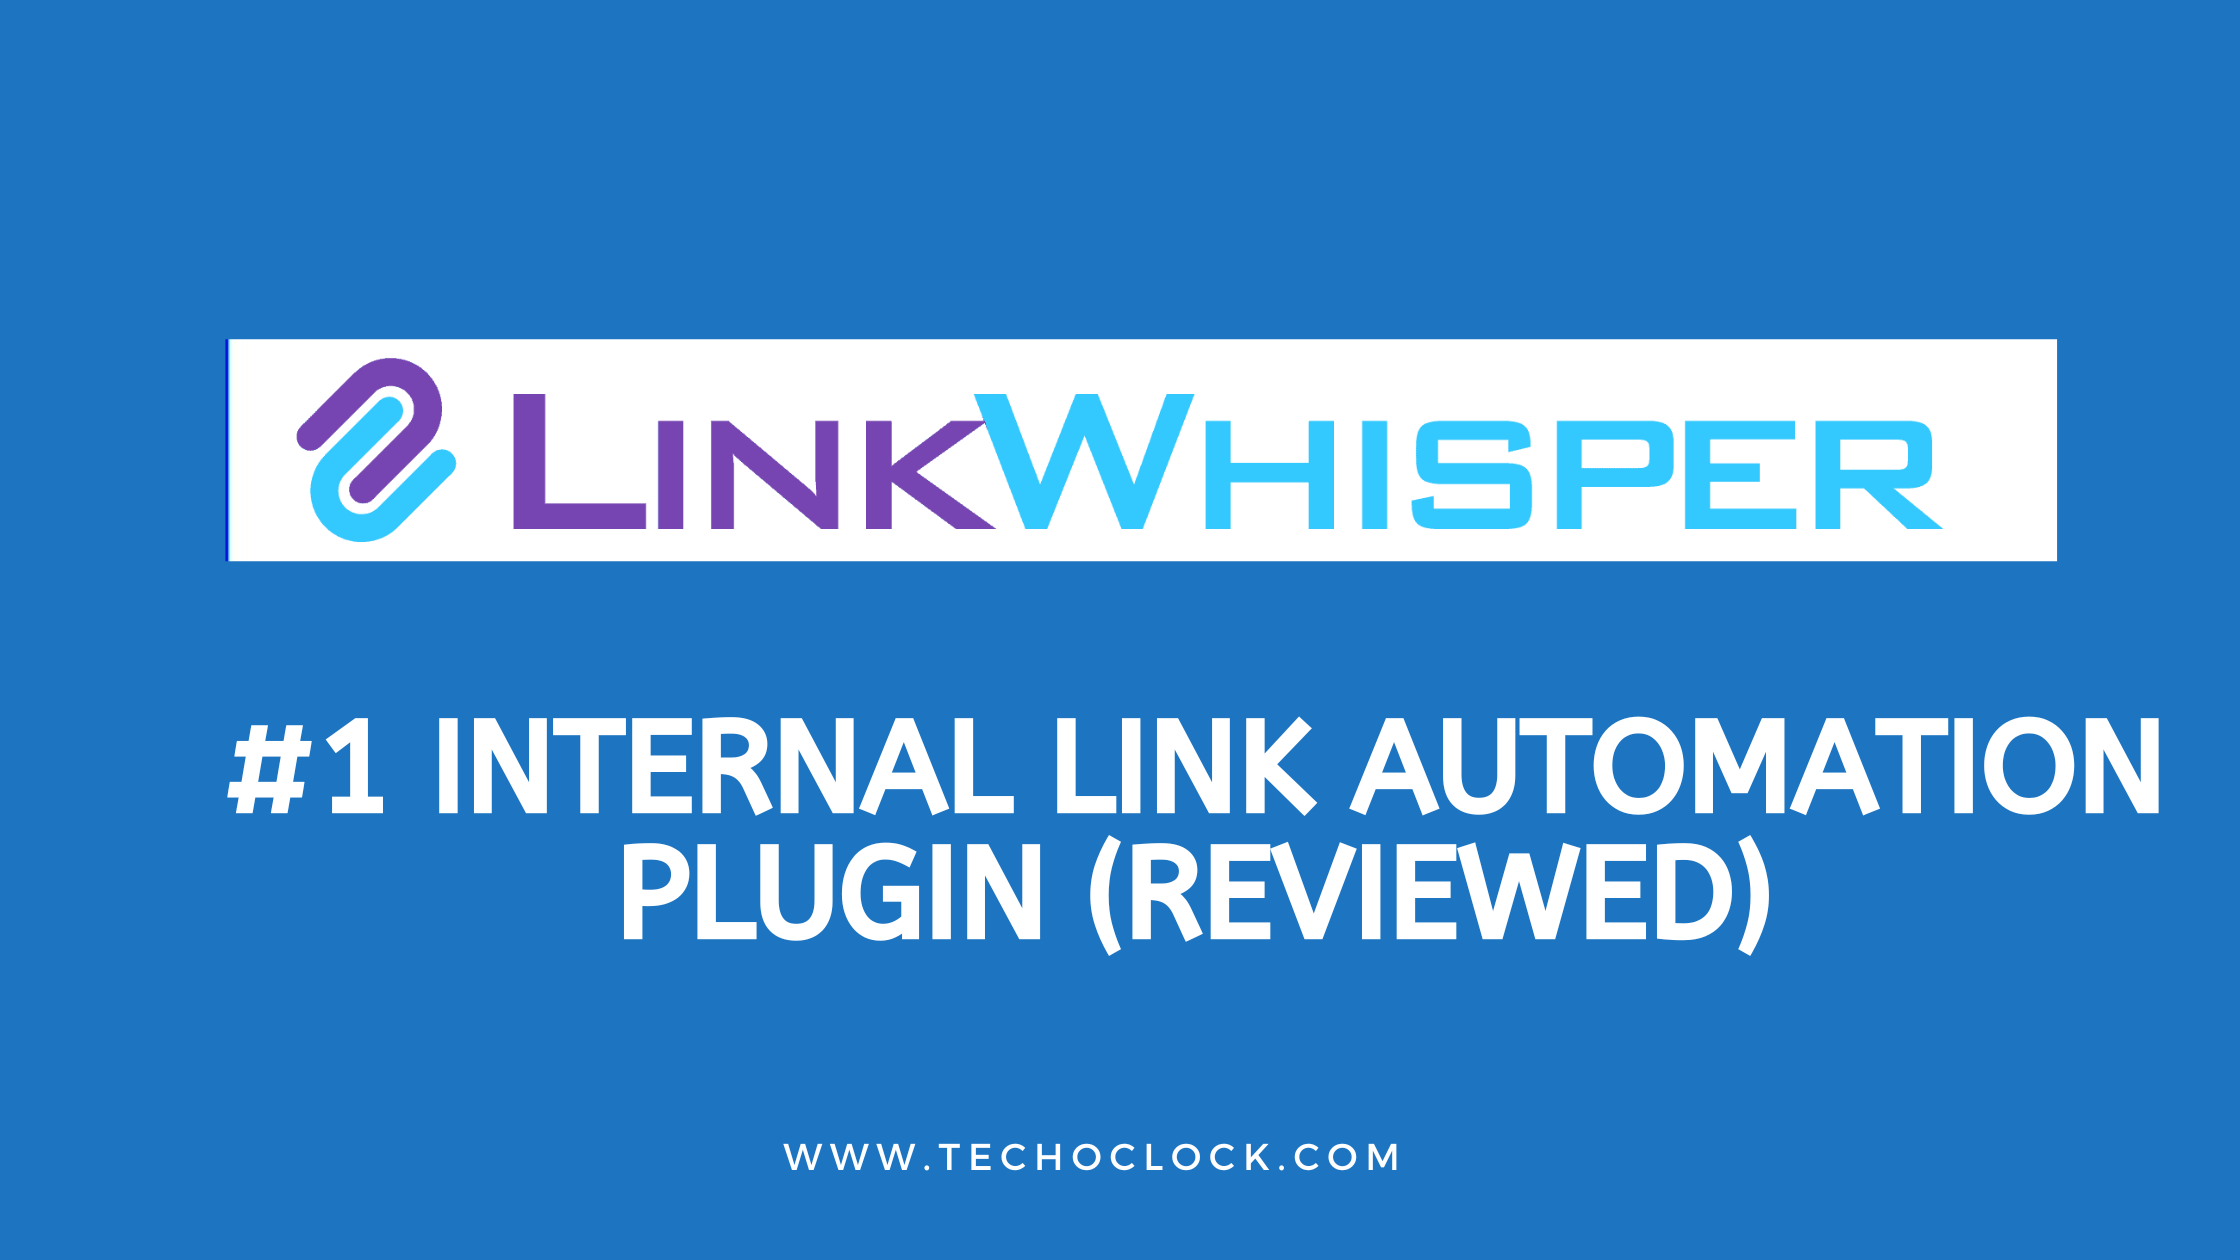 Link Whisper Review 2024: Features, Pricing, Pros and Cons?